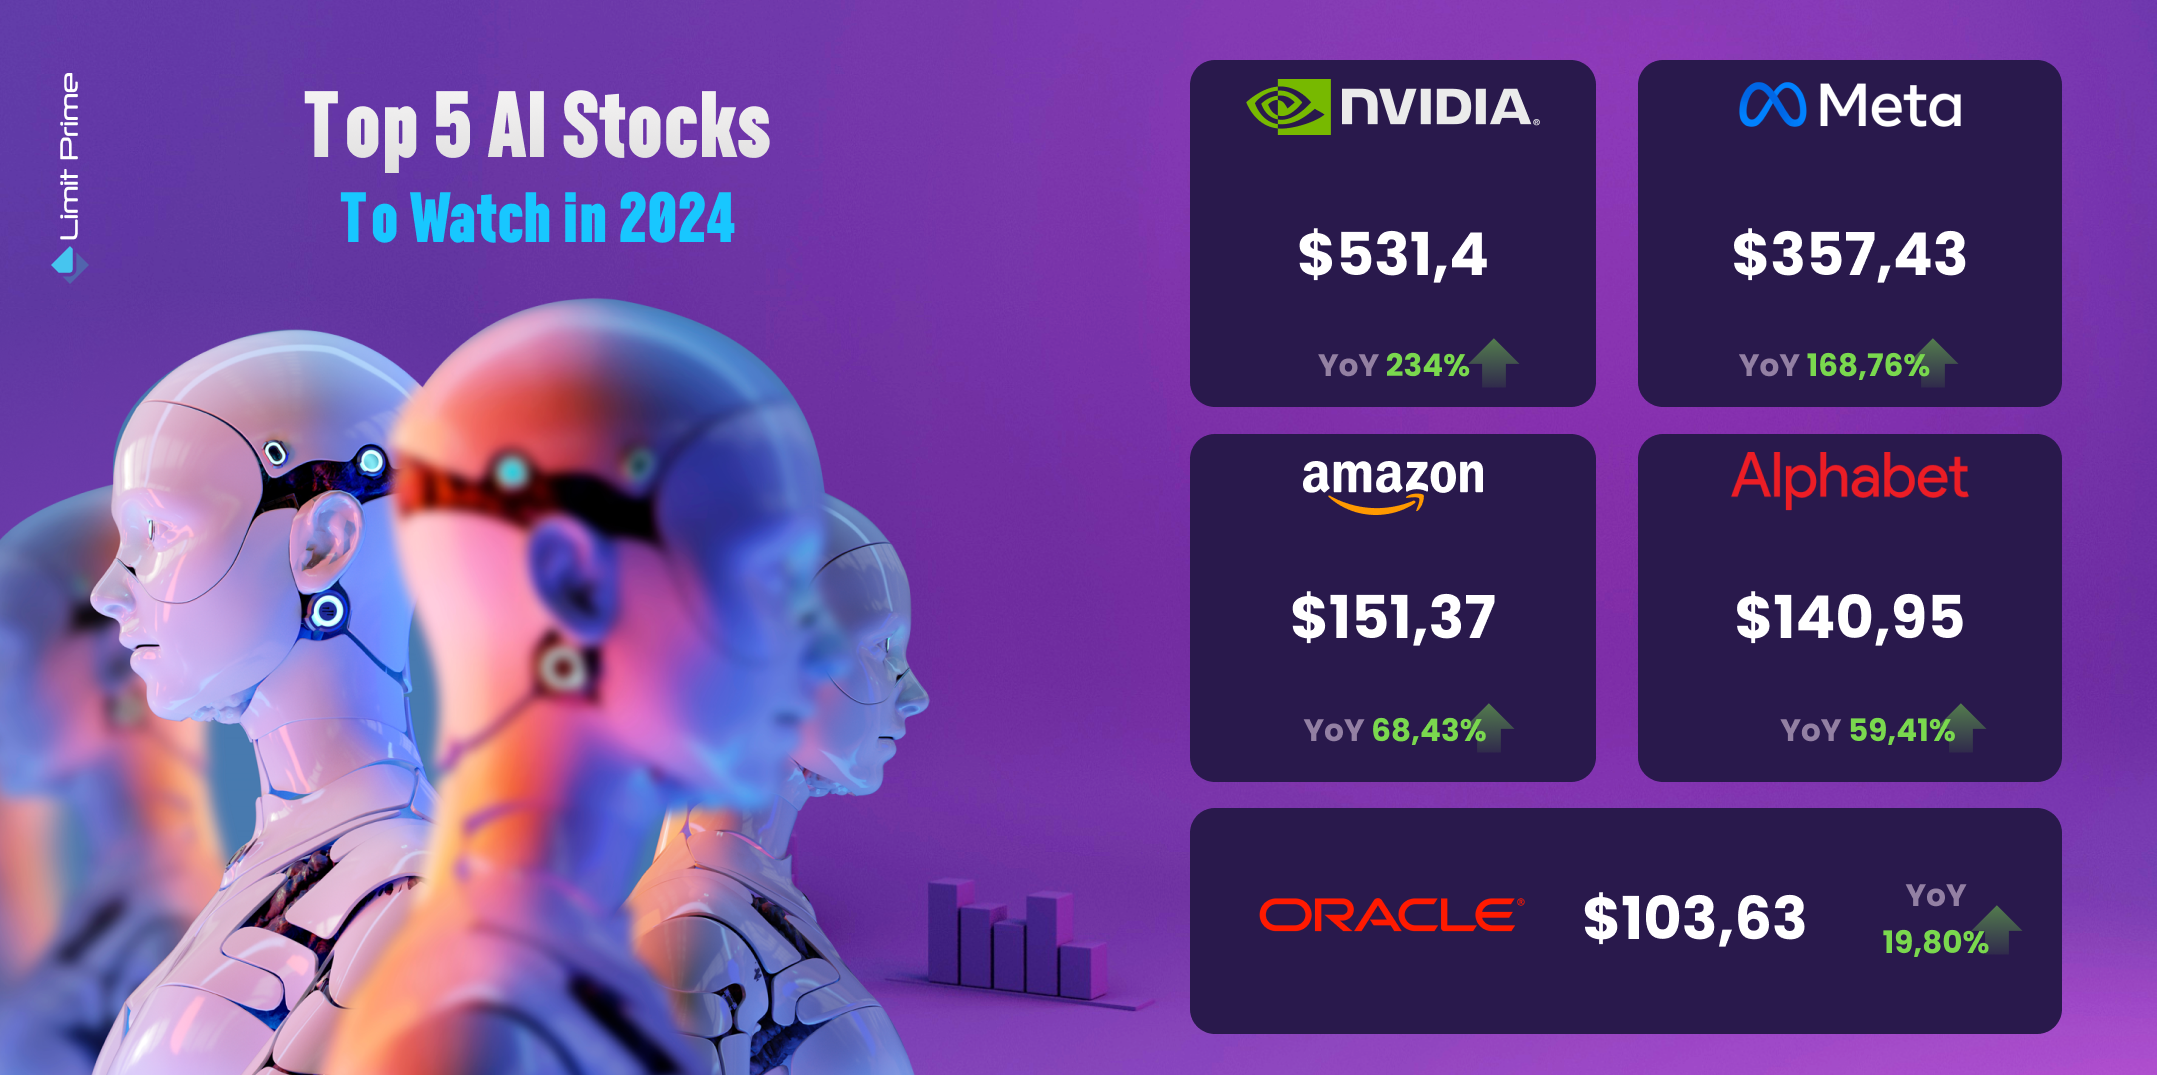 Top 5 AI Stocks To Watch In 2024